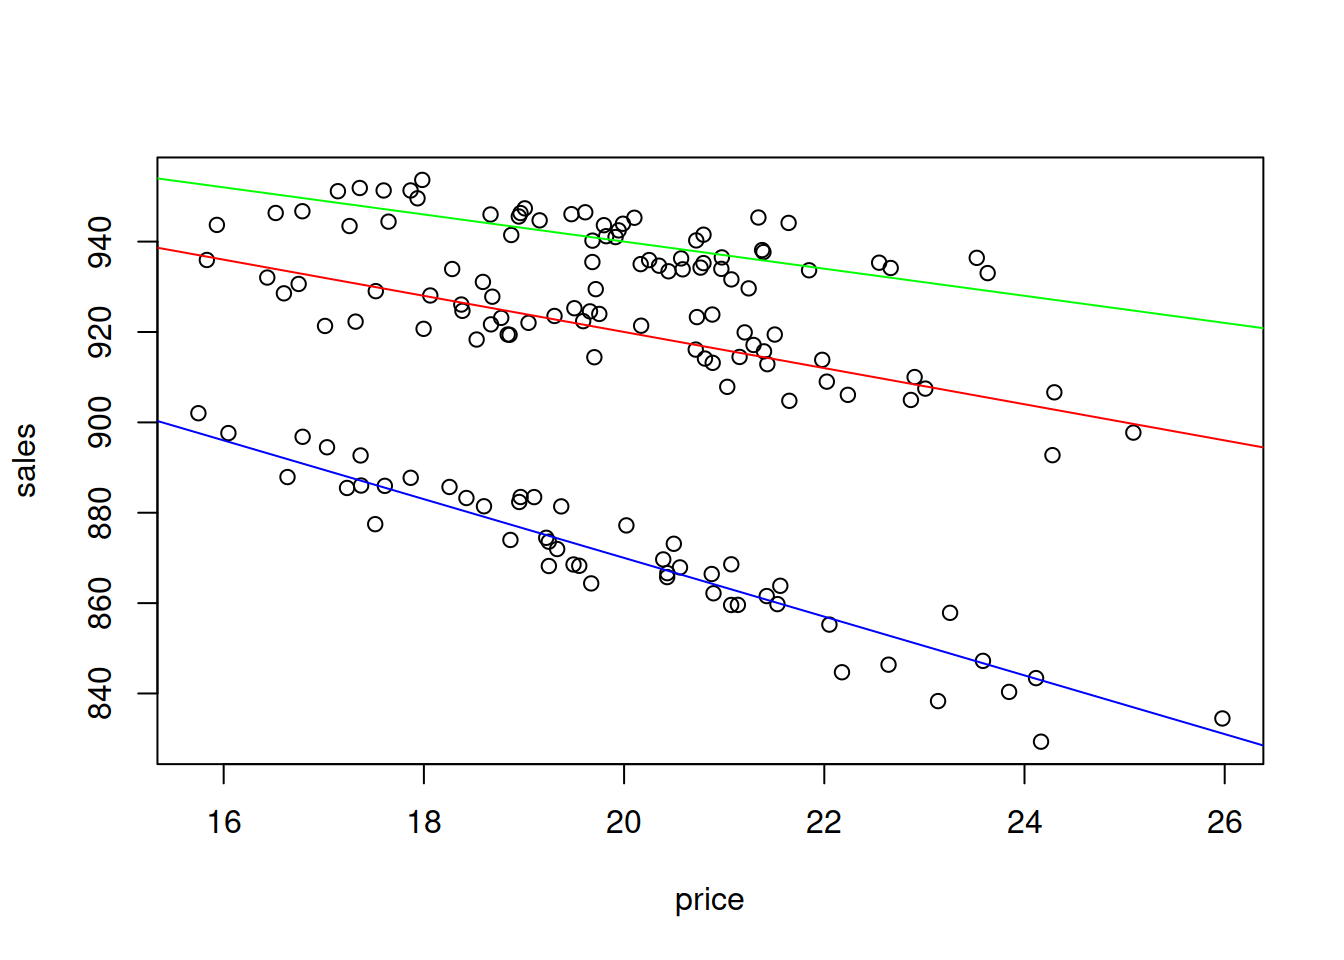 Scatterplot of Sales vs Price of t-shirts of different colour, interaction effect.